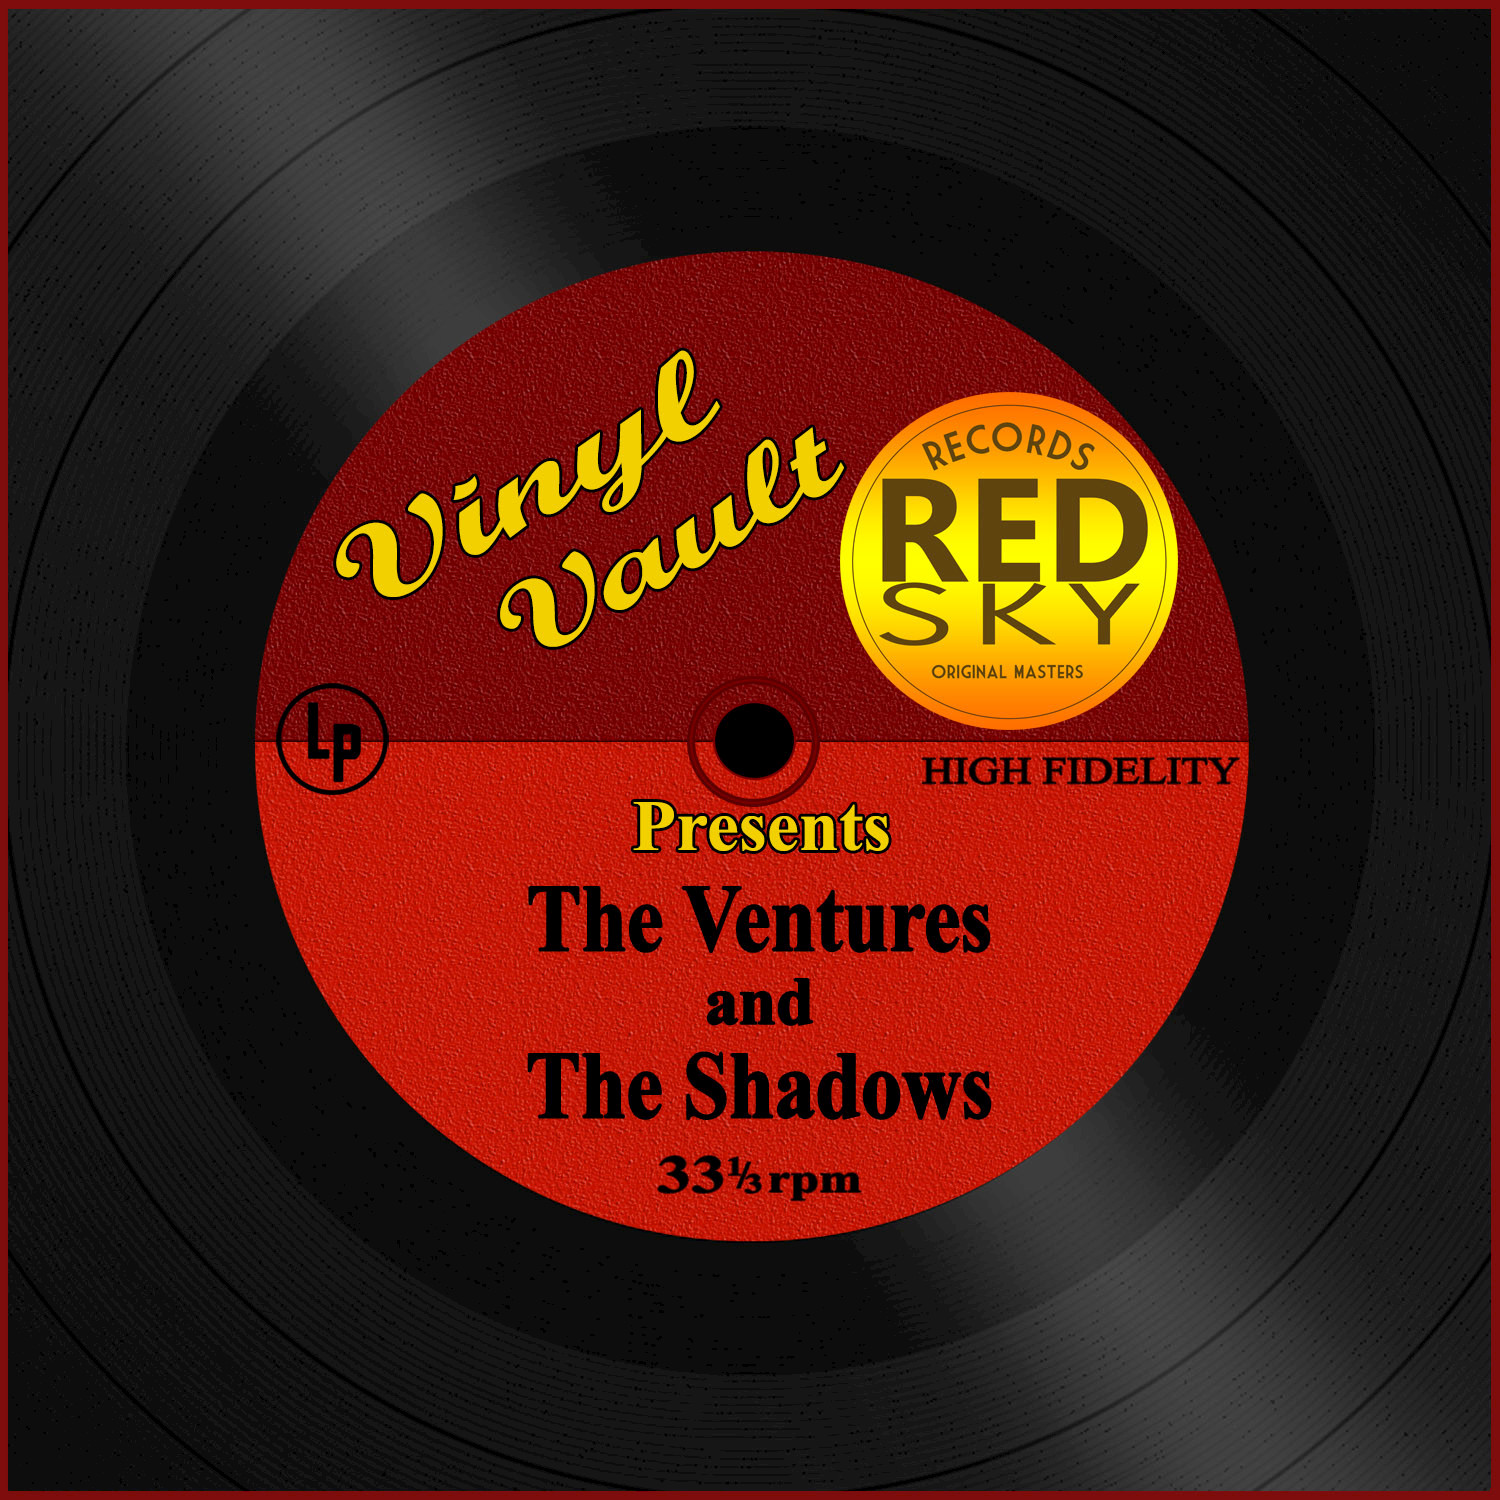 Vinyl Vault Presents The Ventures and The Shadows